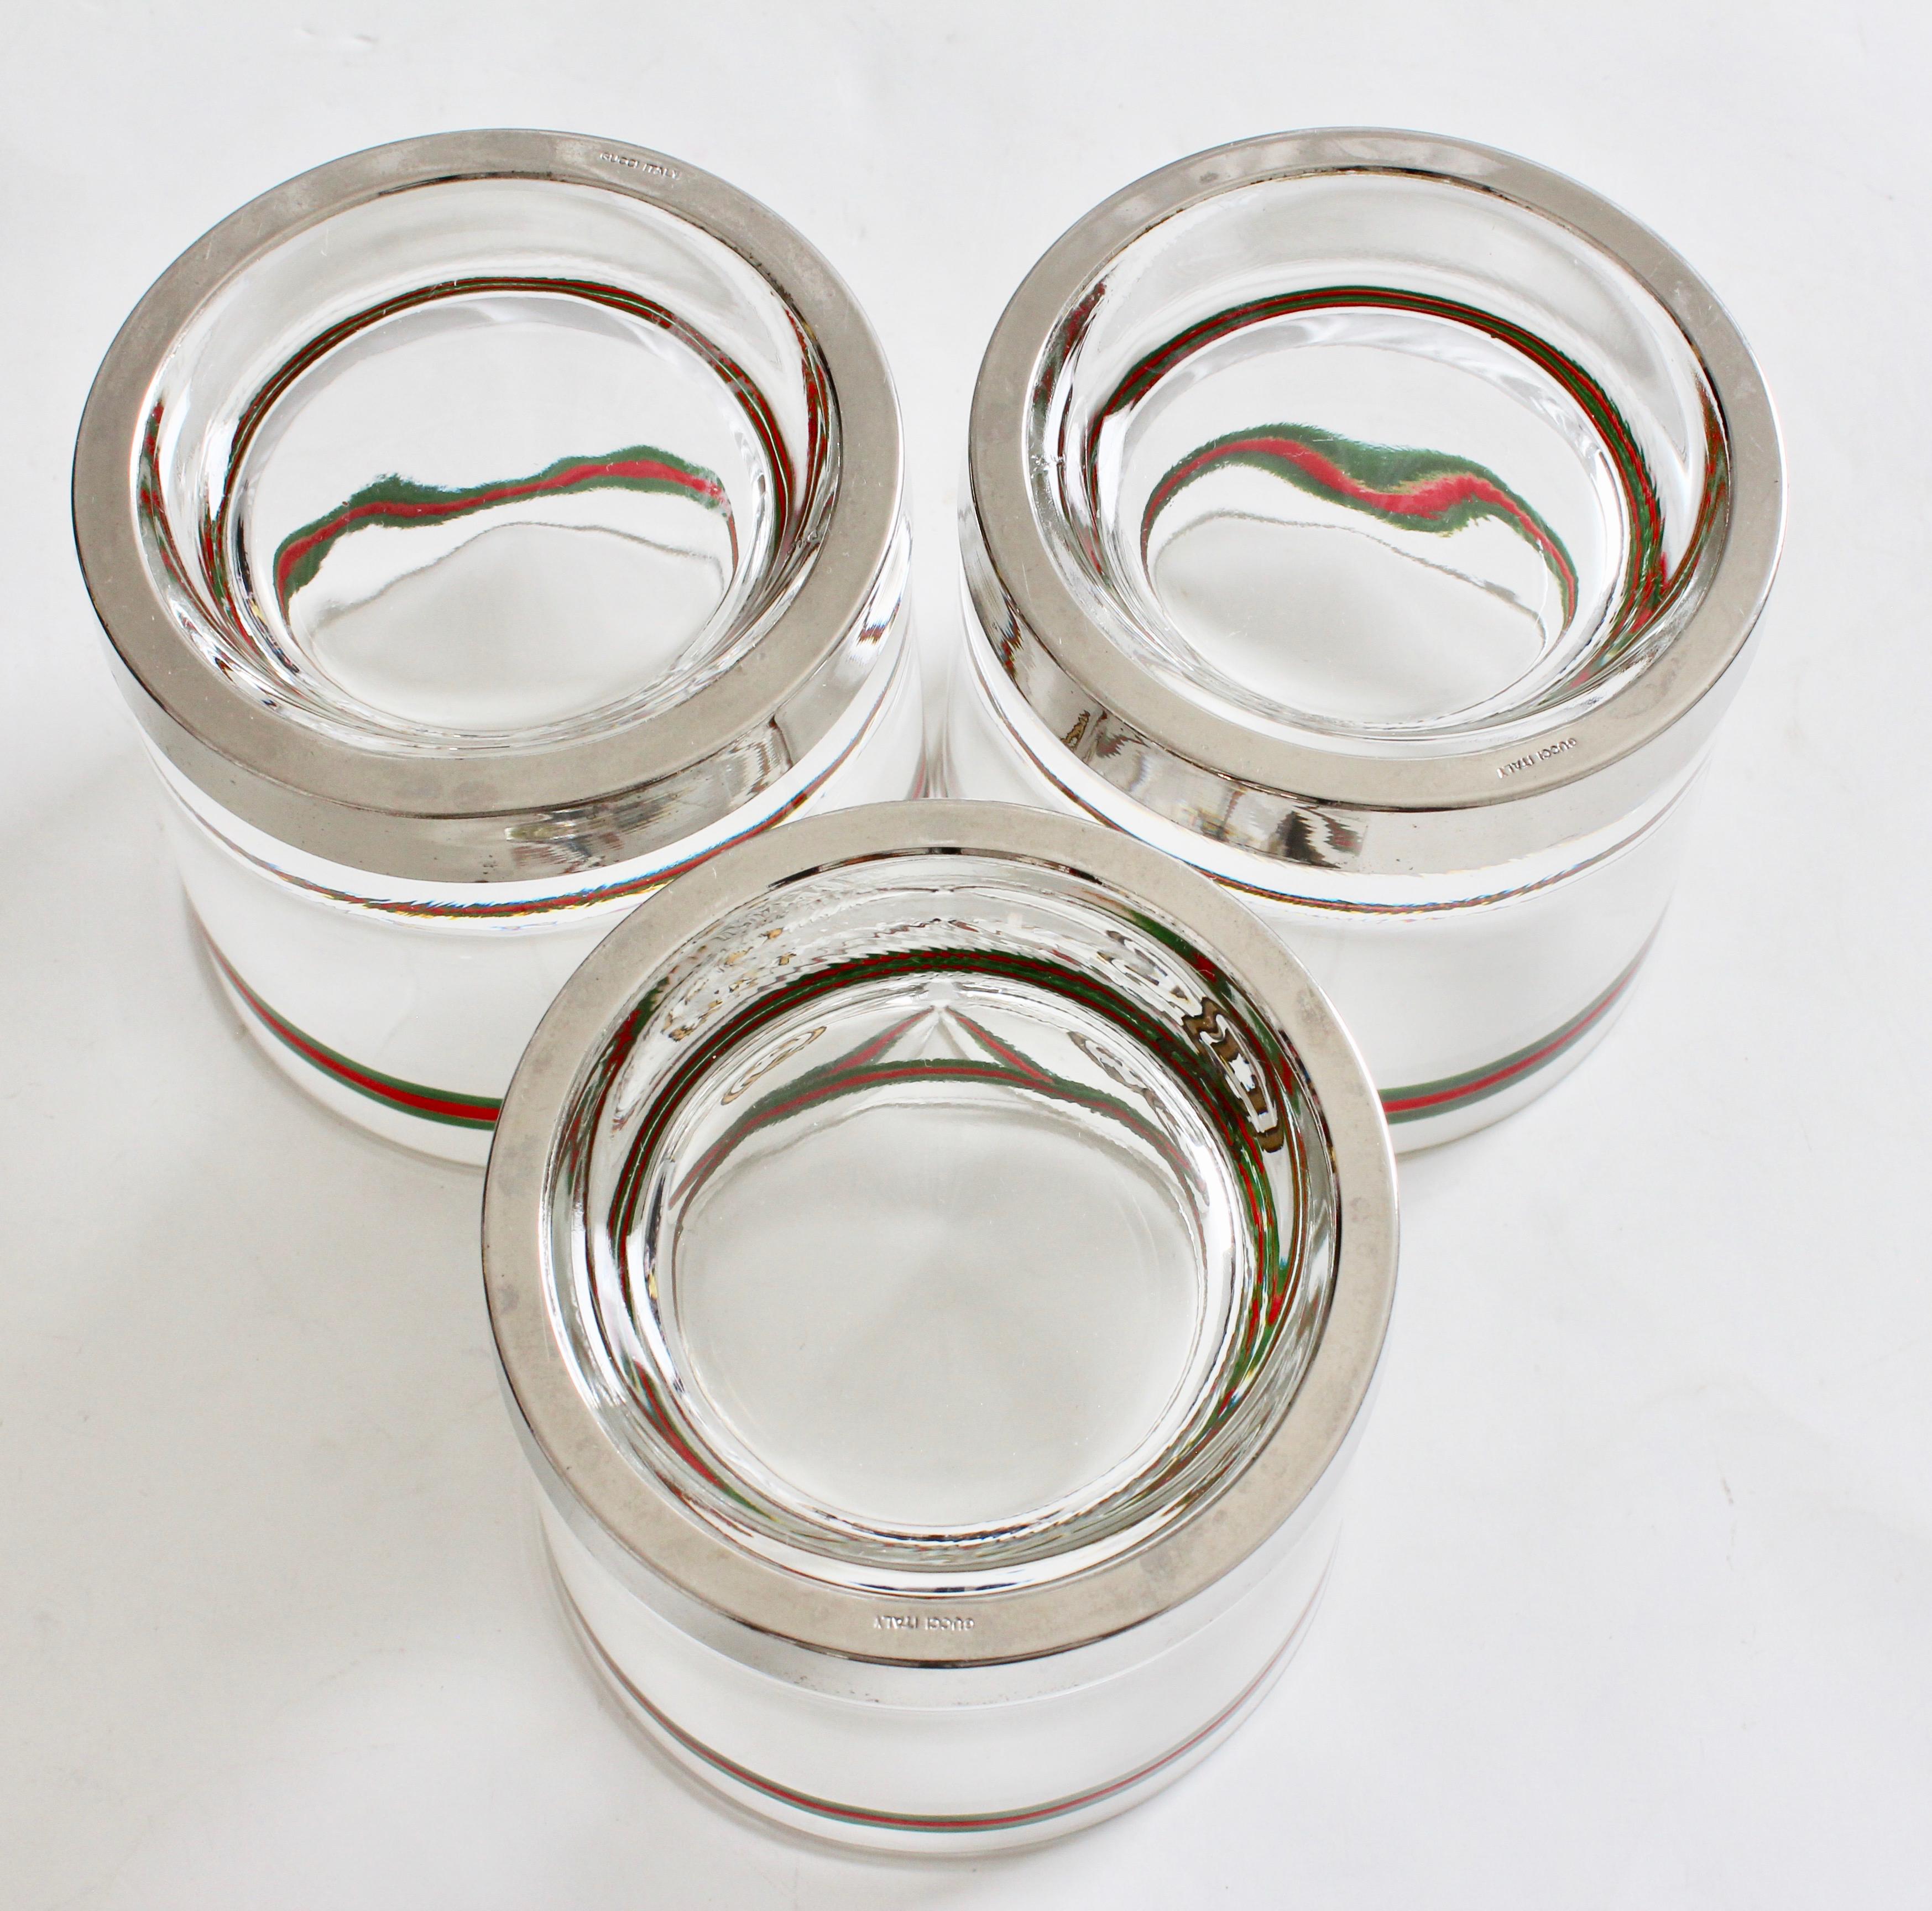 Rare Gucci Cocktail Glasses Barware Set of 3 with Silver Base Vintage 70s  2